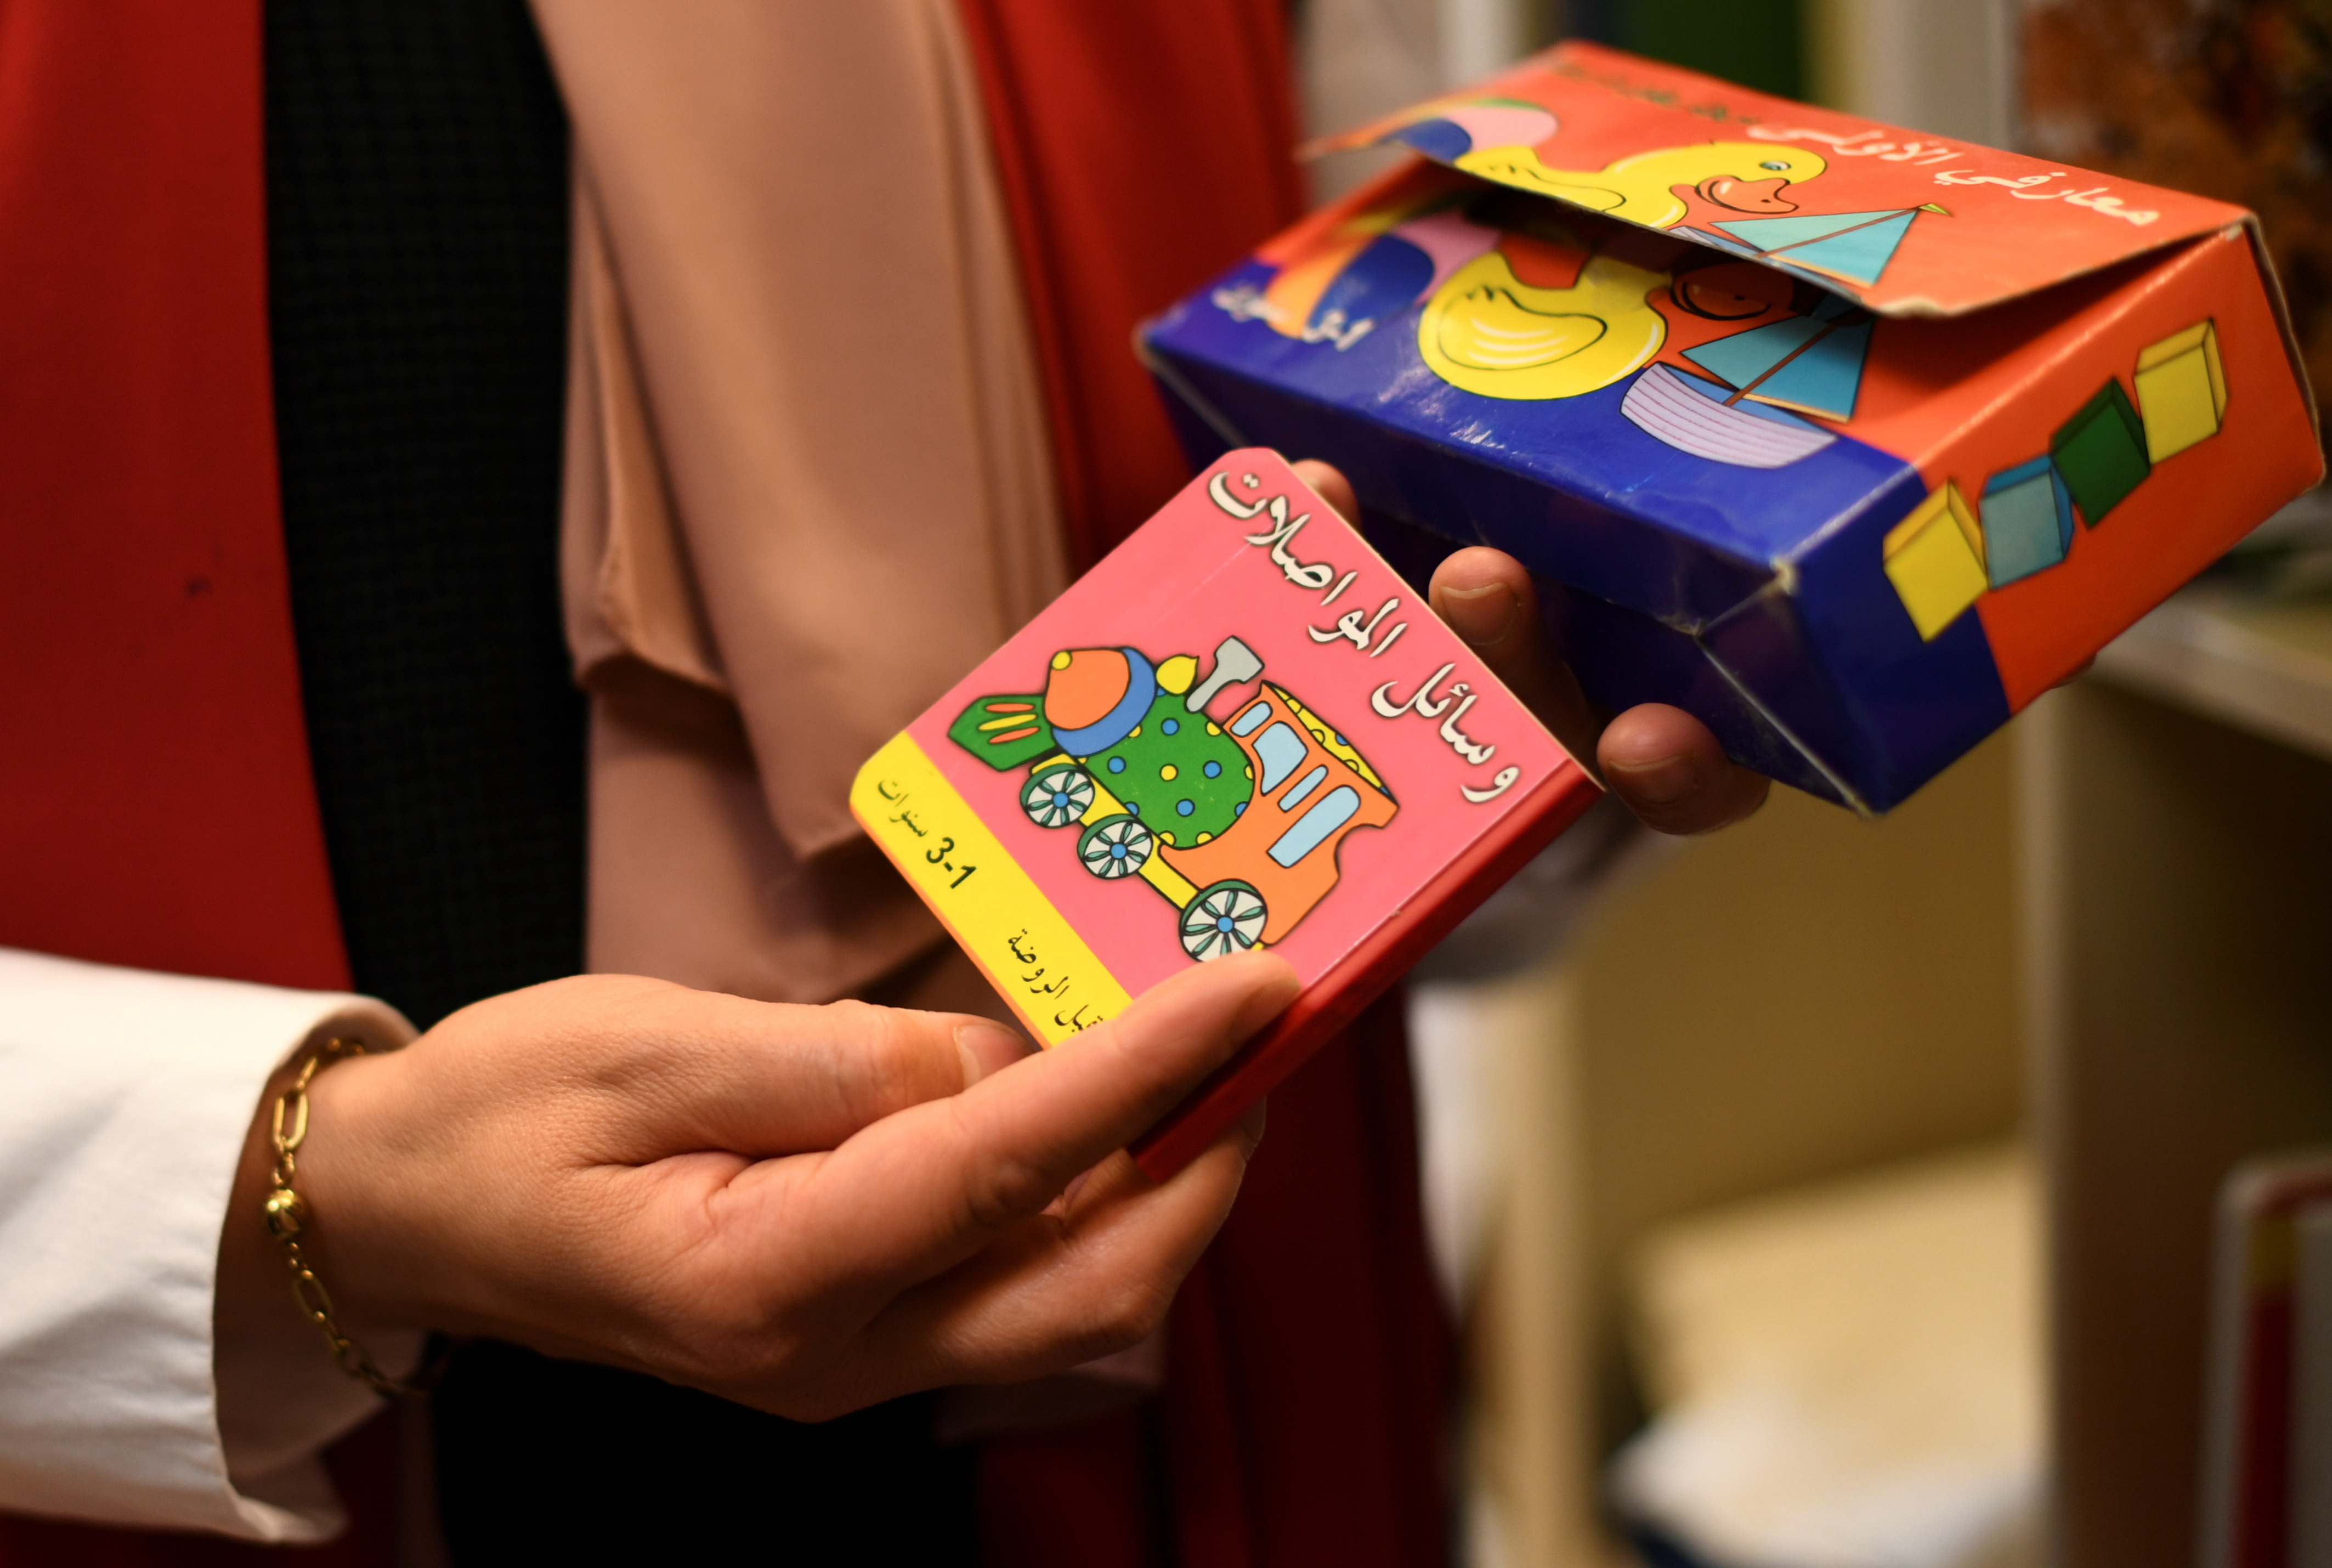 A foreign language children's book is pictured in the hands of Social worker Noor Zayed of the Stadtteilmuetter migrant integration project run by Protestant charity Diakonie in Berlin's district of Neukoelln, Germany May 4, 2021. Picture taken May 4, 2021.  REUTERS/Annegret Hilse